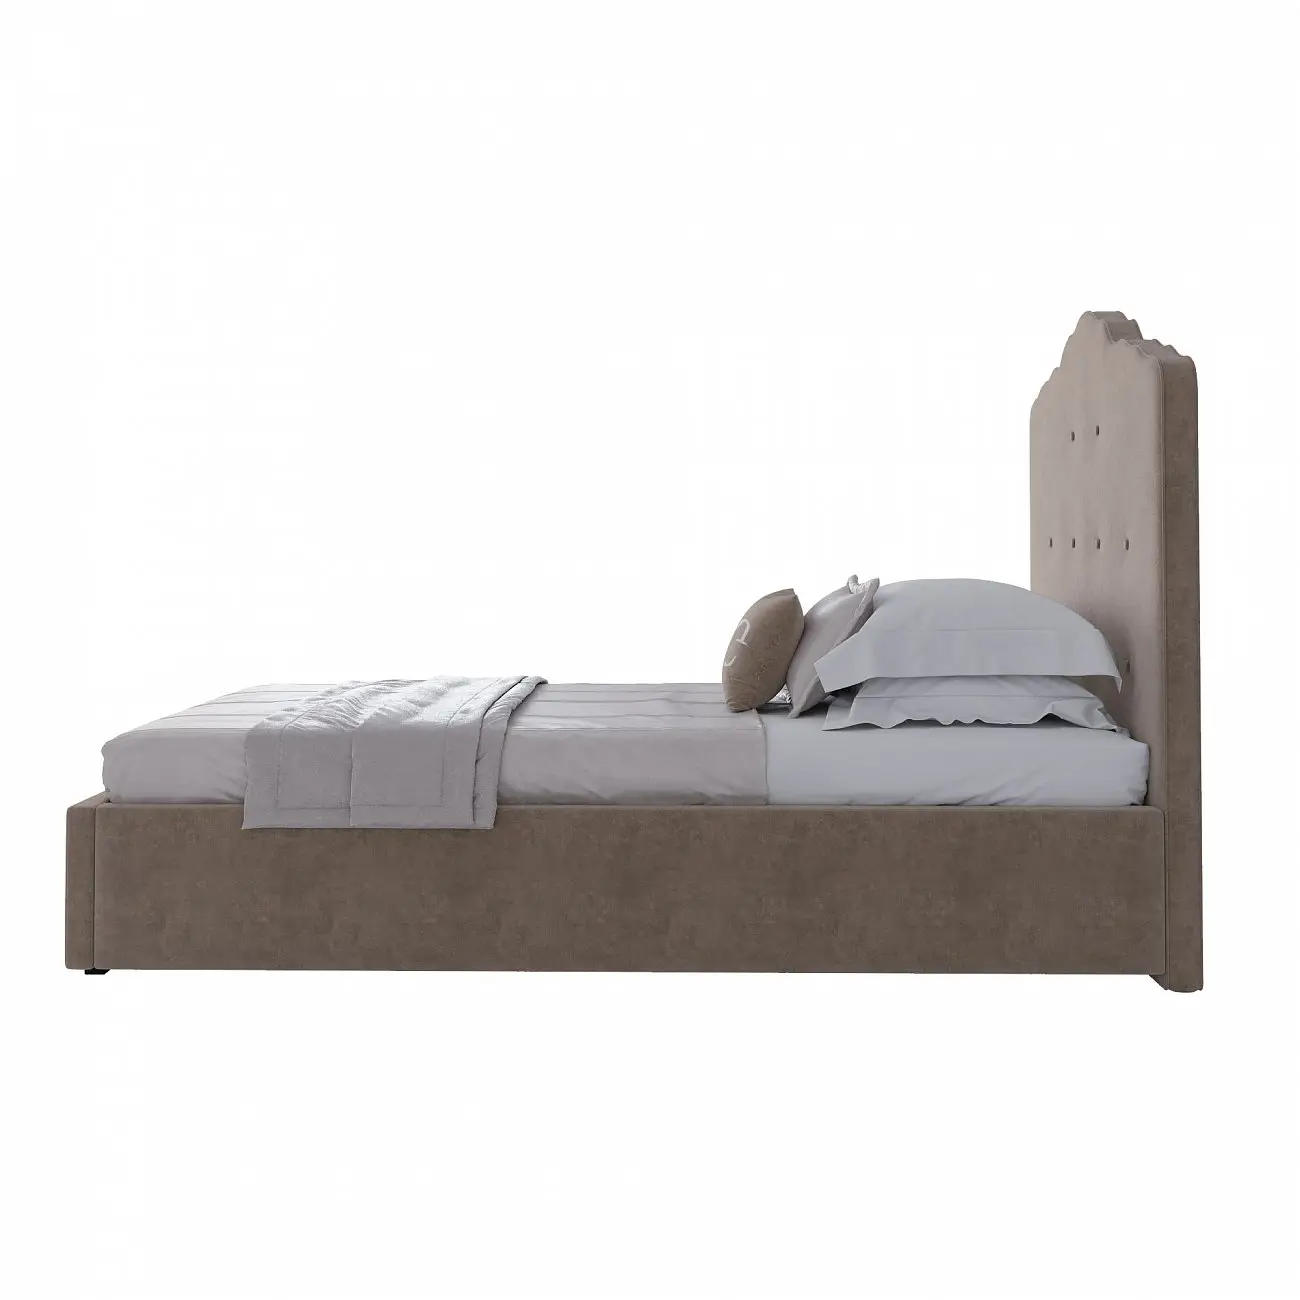 Single bed with upholstered headboard 90x200 cm beige Palace